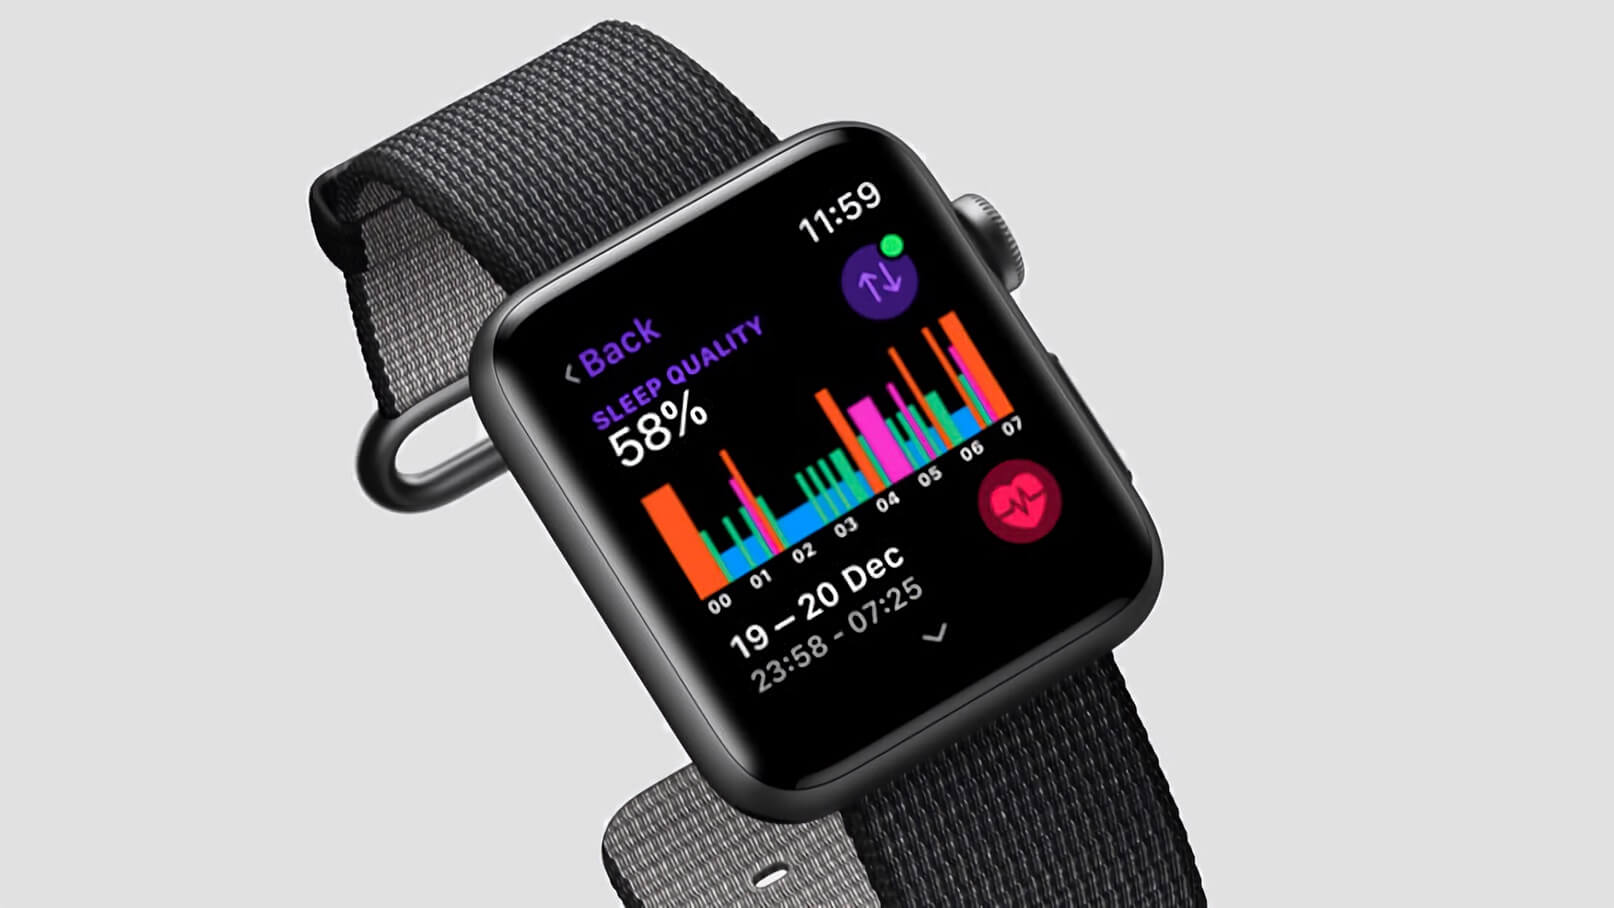 Apple Watch might soon get built-in sleep tracking